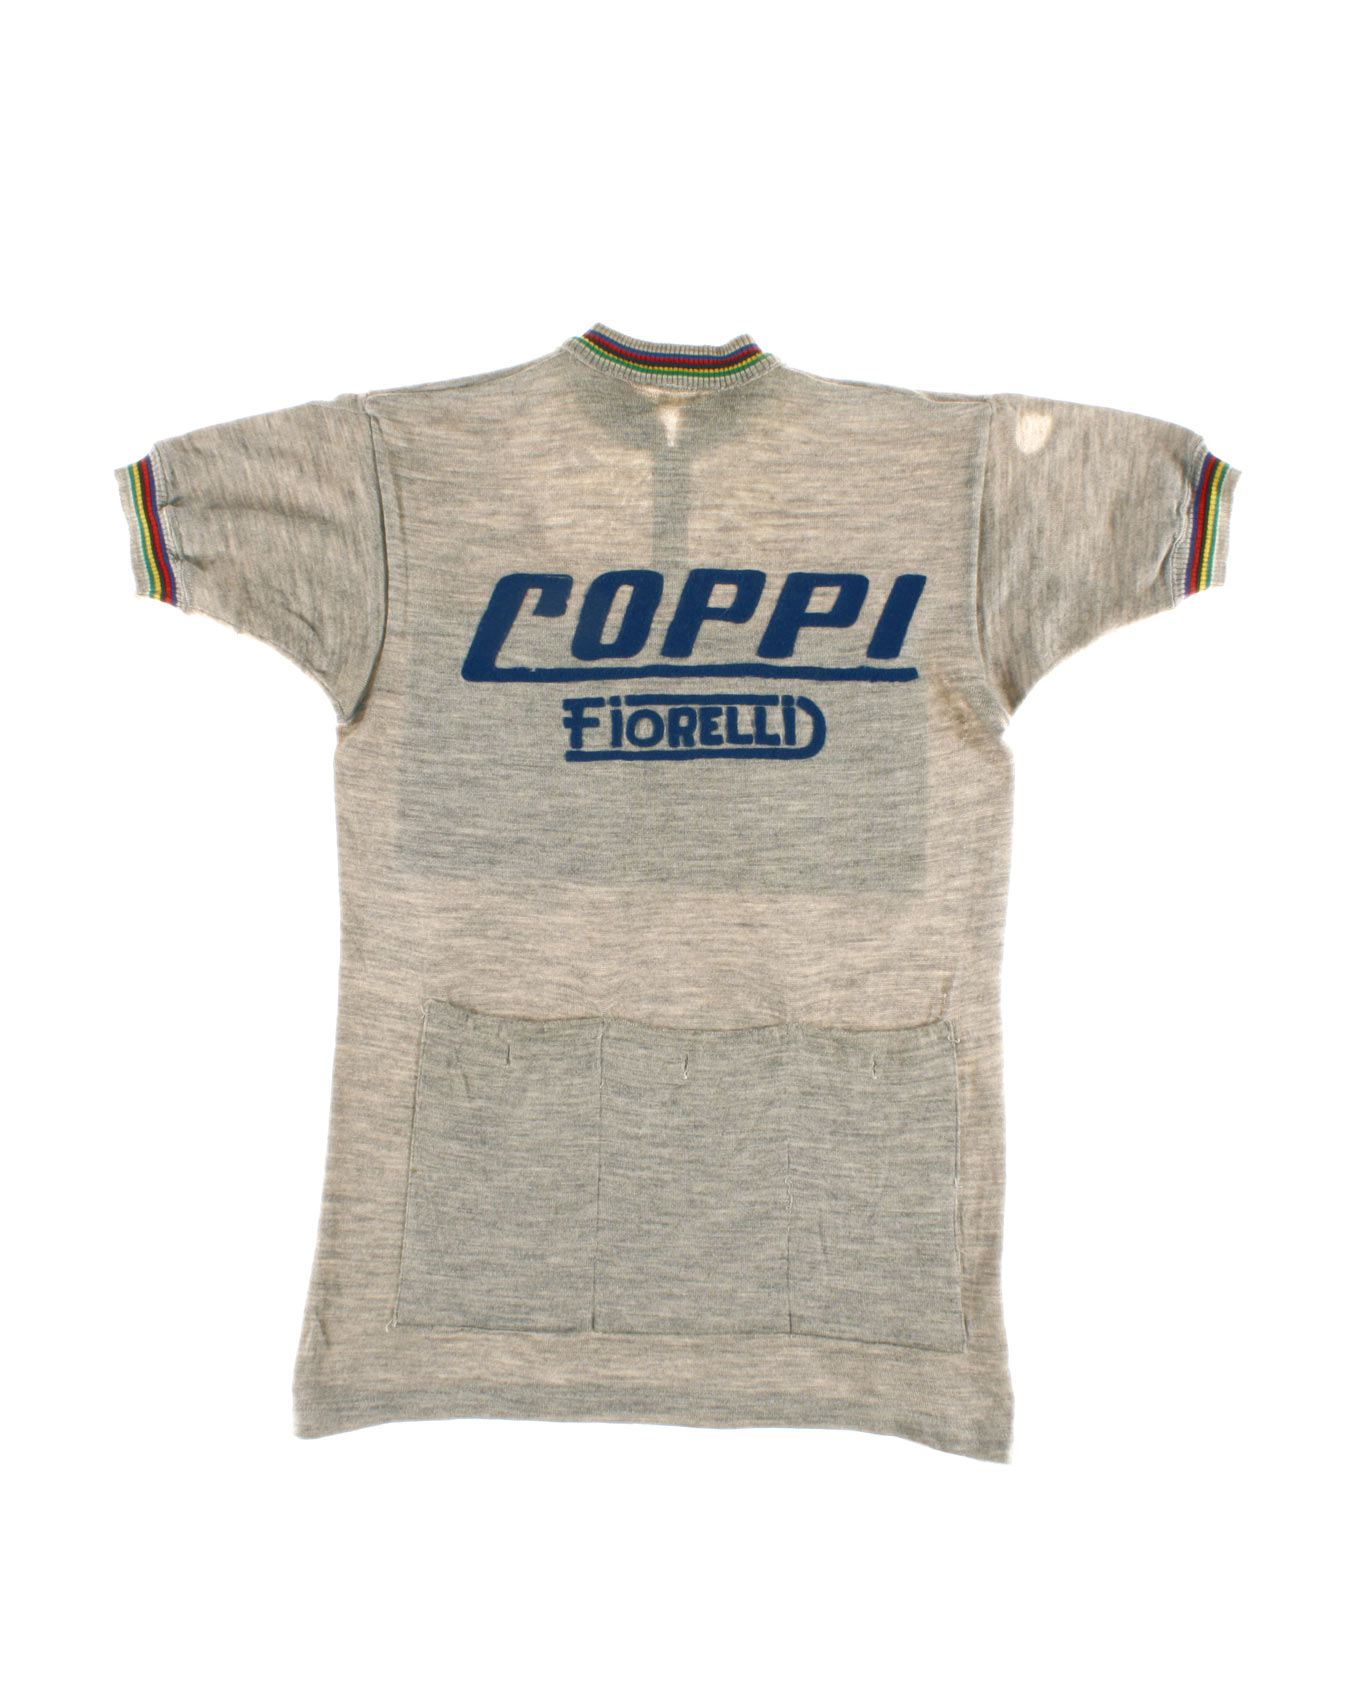 Italy. coppi Fiorelli Cycling wool Rare t-shirt 50s